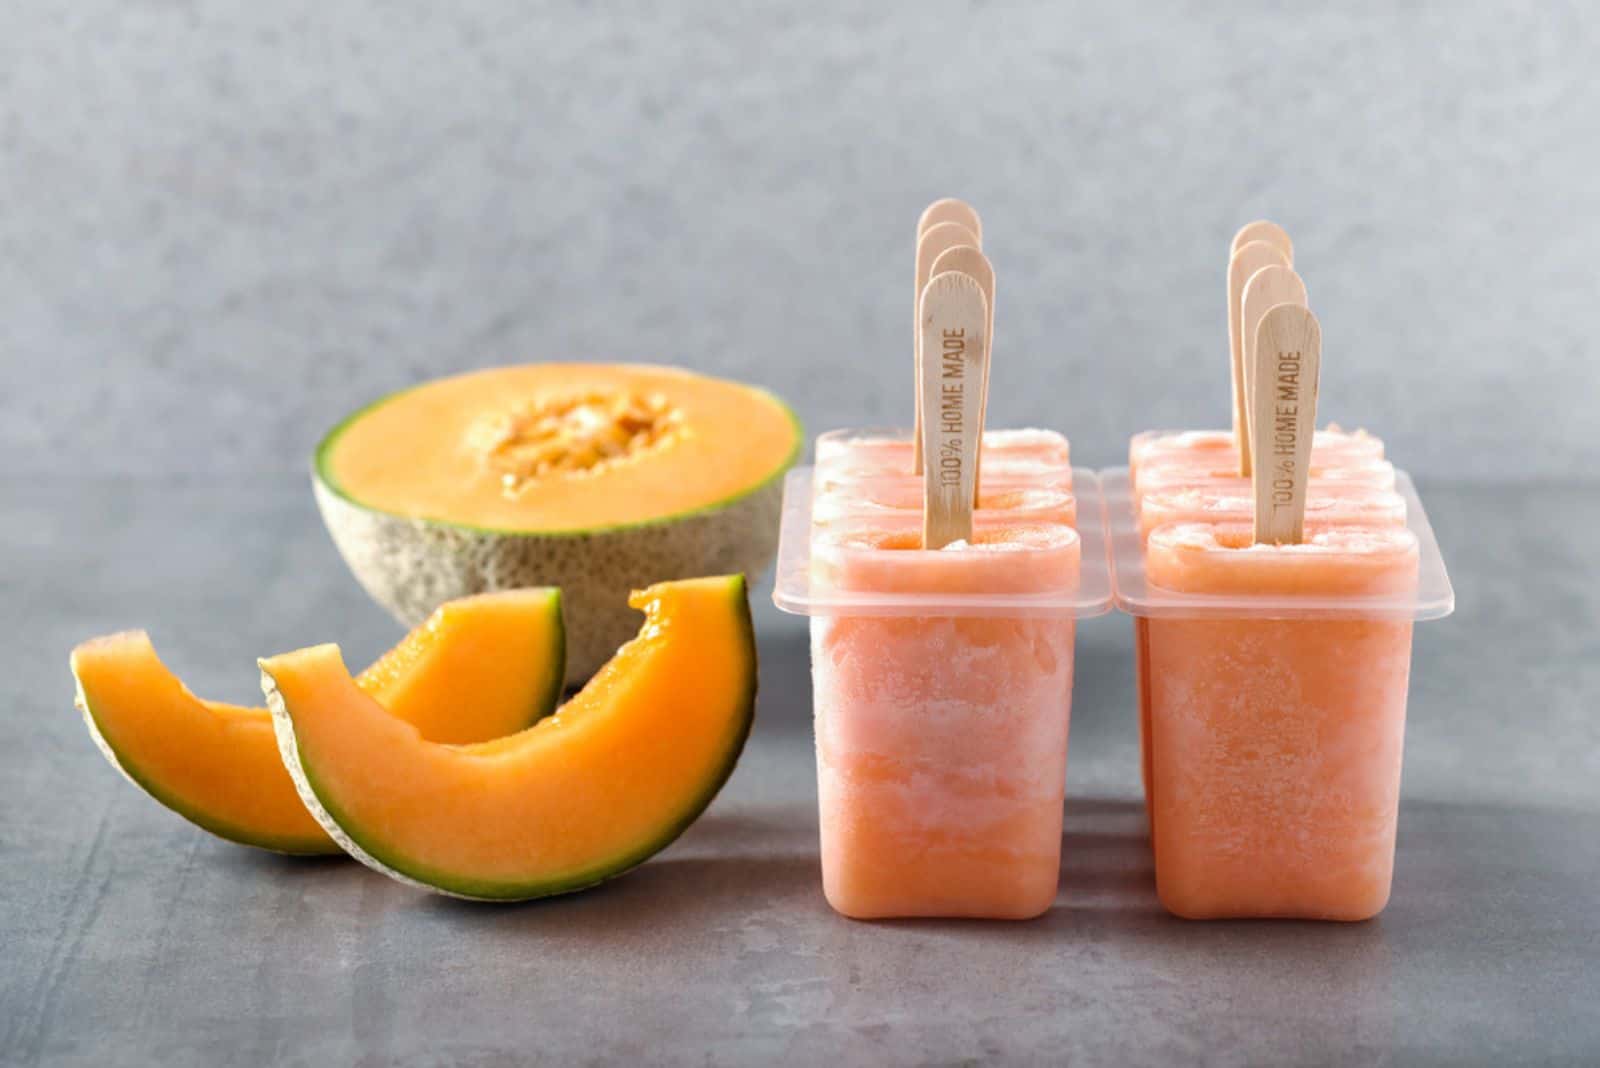 Homemade cantaloupe melon popsicles with fresh slices